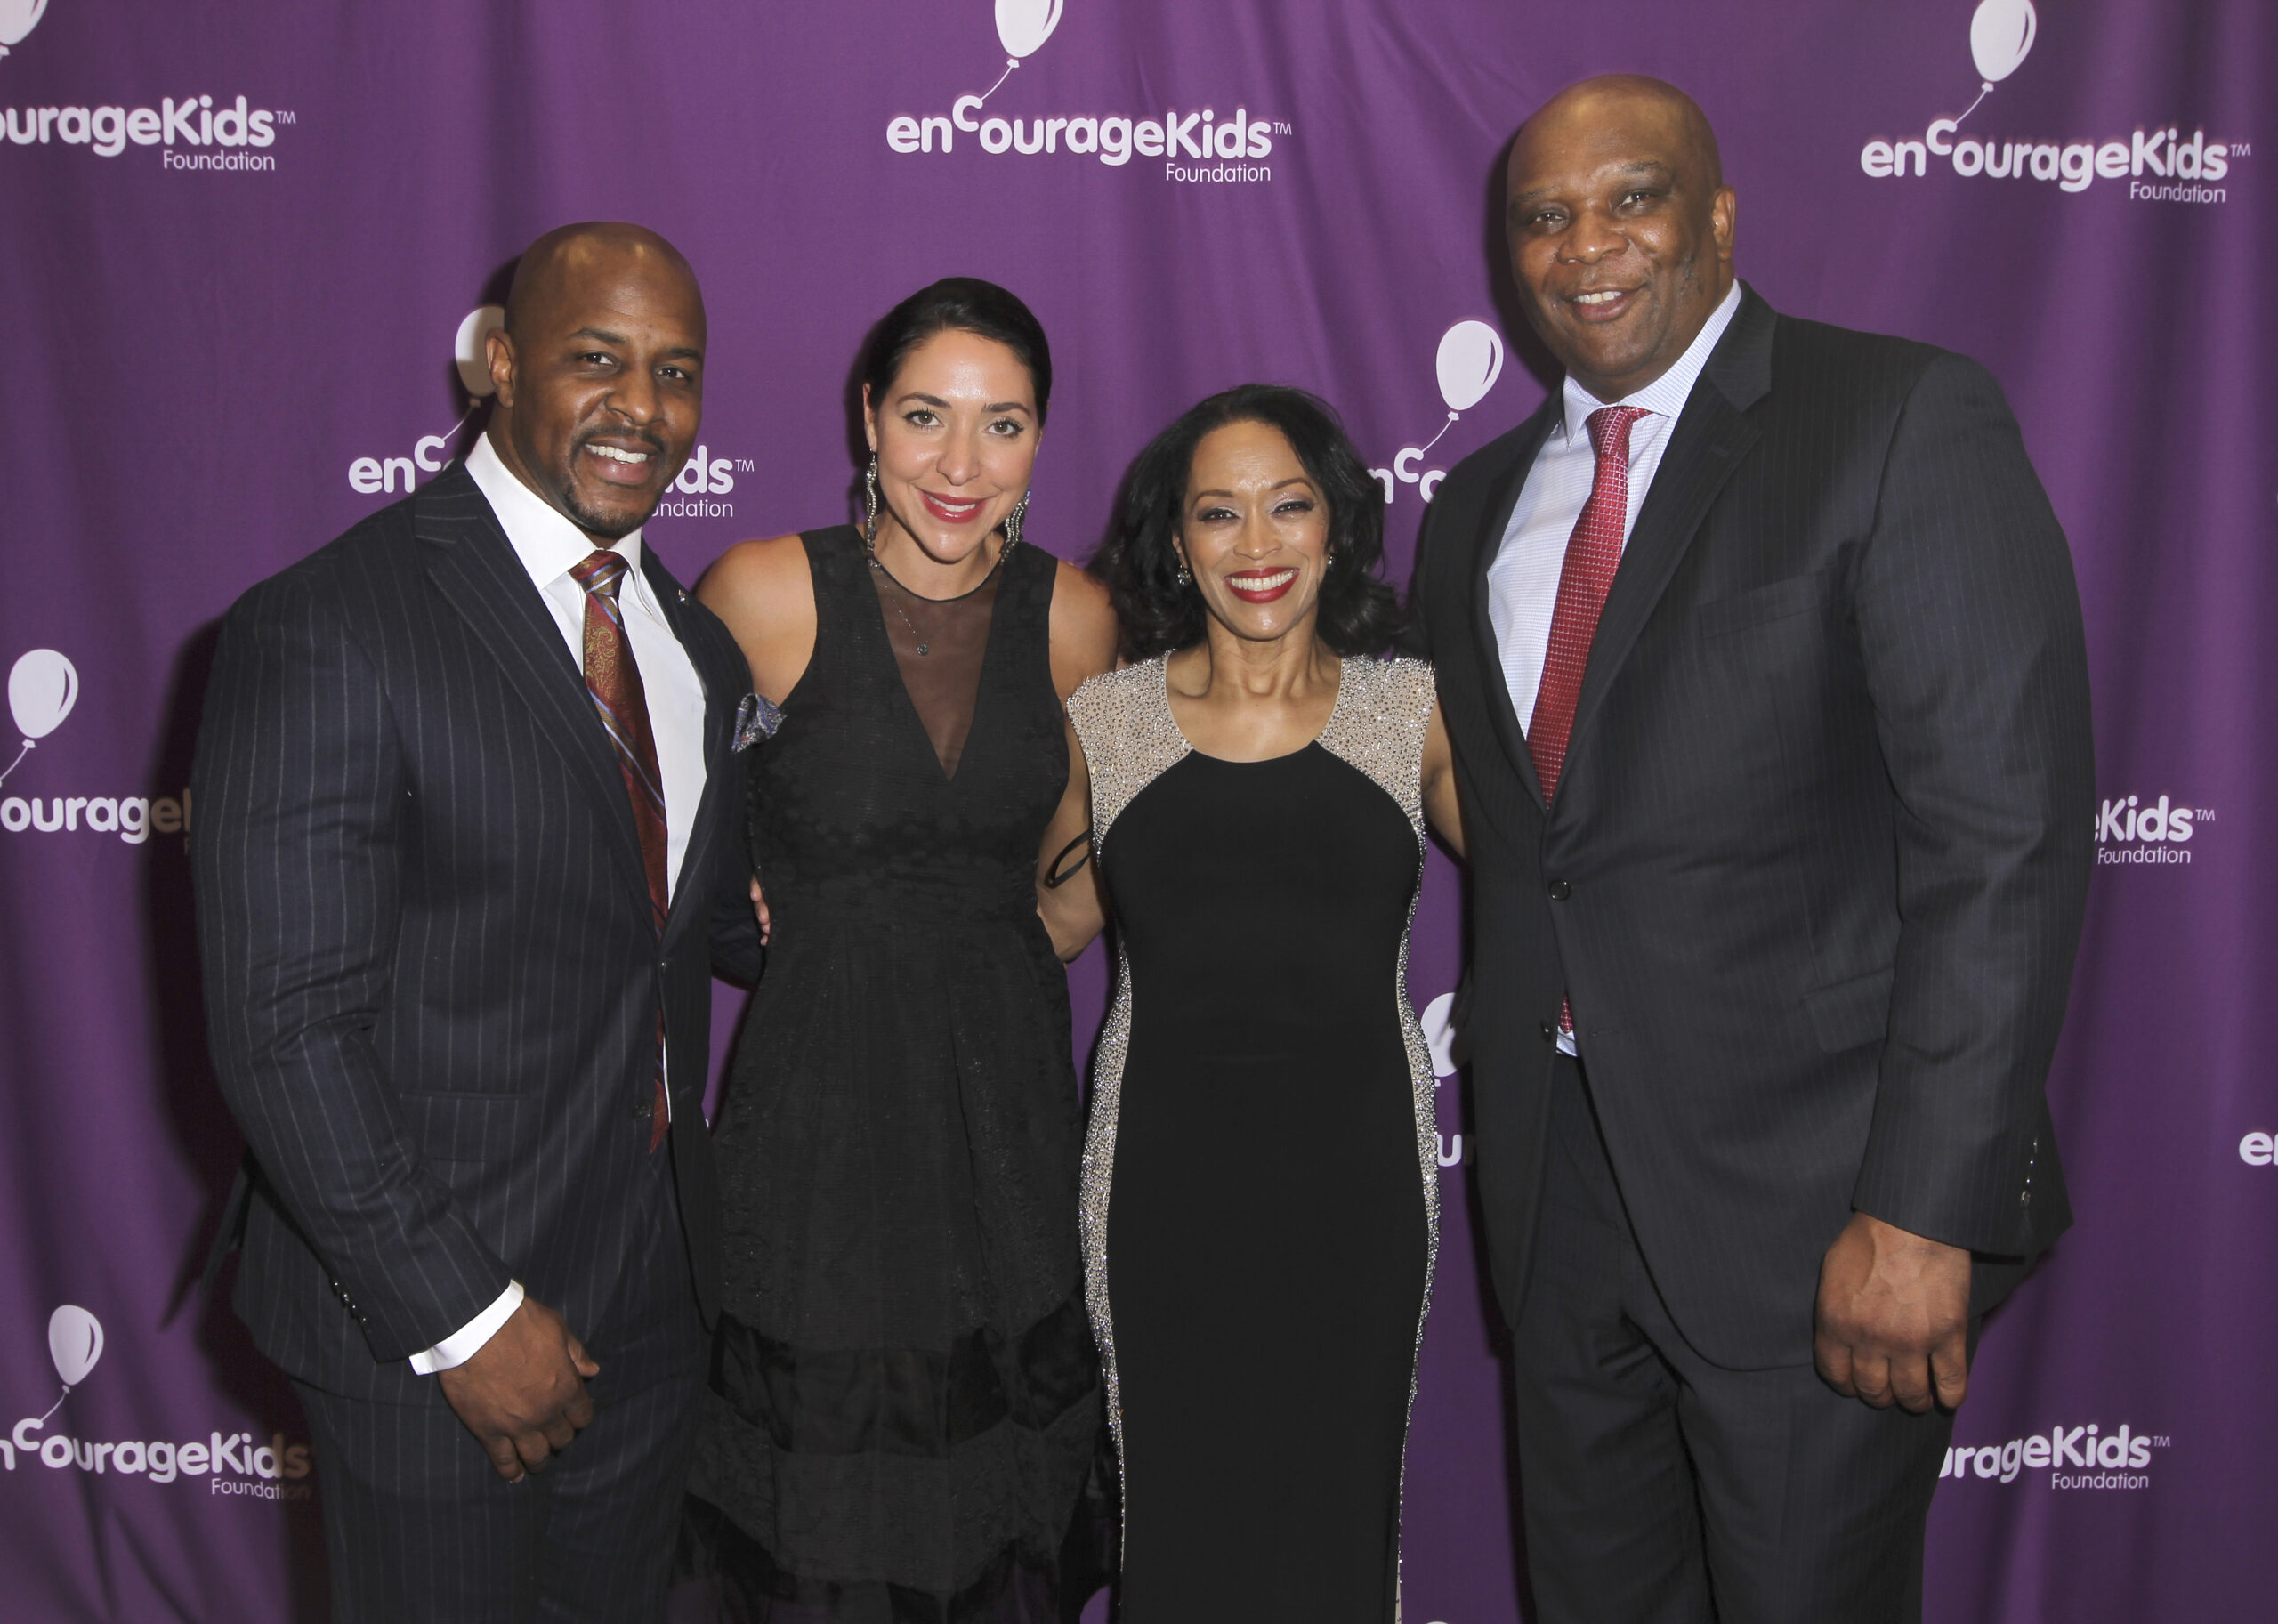 ENCOURAGE KIDS FOUNDATION HOSTS 34TH ANNUAL GALA HONORING TOP REAL ESTATE EXECUTIVES  – MARCH 21, 2019 USA attend the ÒENCOURAGE KIDS FOUNDATION HOSTS 34TH ANNUAL GALA HONORING TOP REAL ESTATE EXECUTIVESÓ